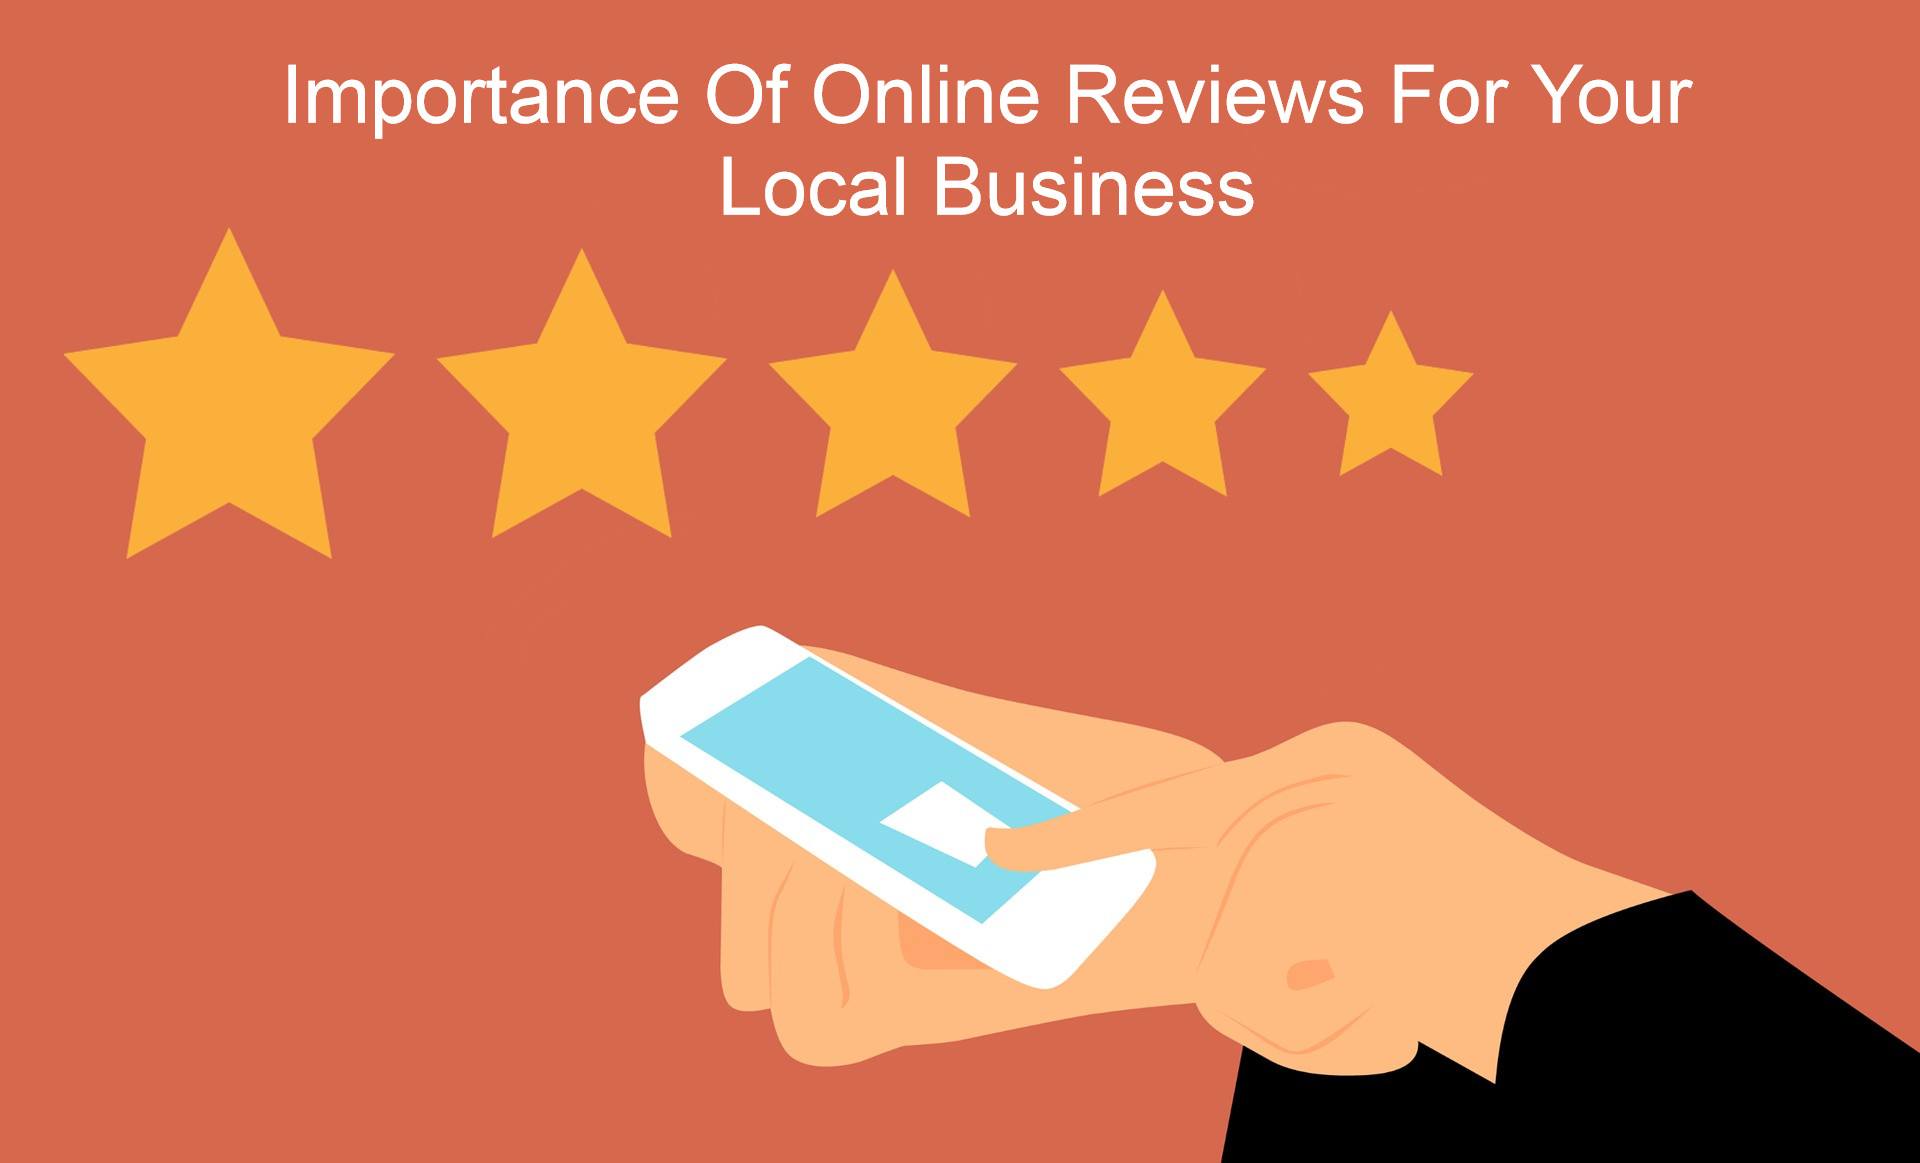 How Are Online Reviews Important For your Business?